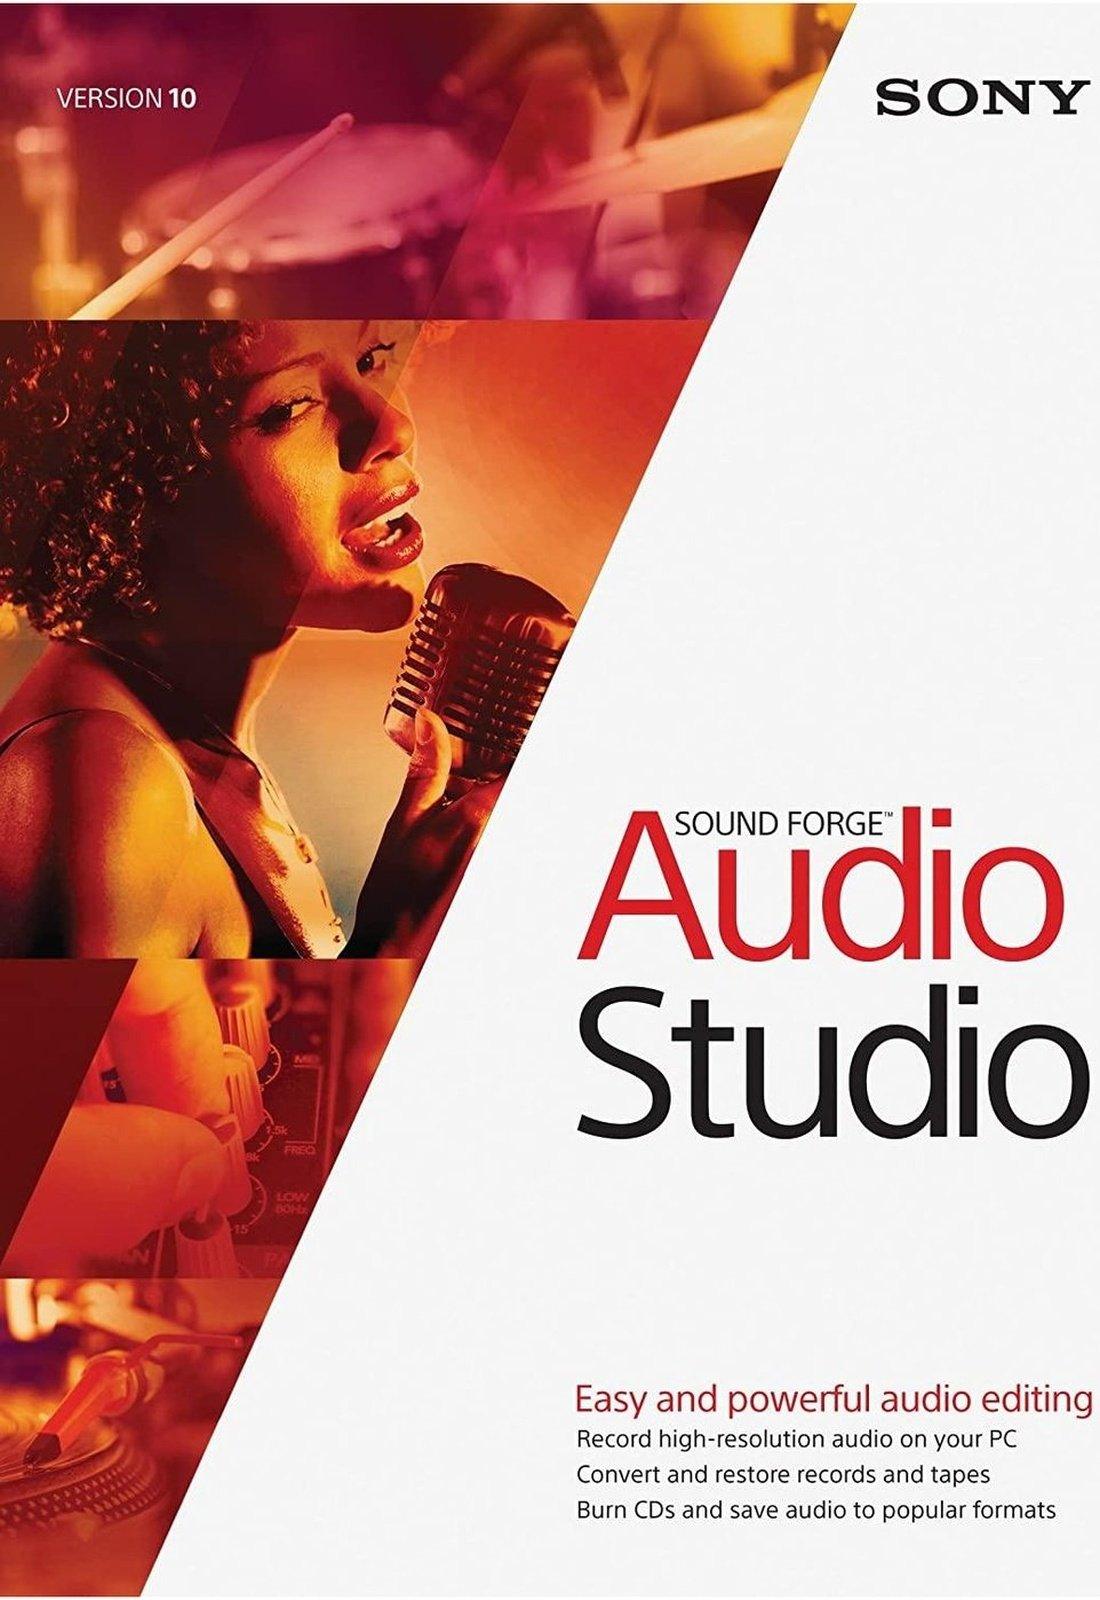 Magix Sound Forge Audio Studio 10 - Instant Download for Windows (1 Computer) - SoftwareCW - Authorized Reseller